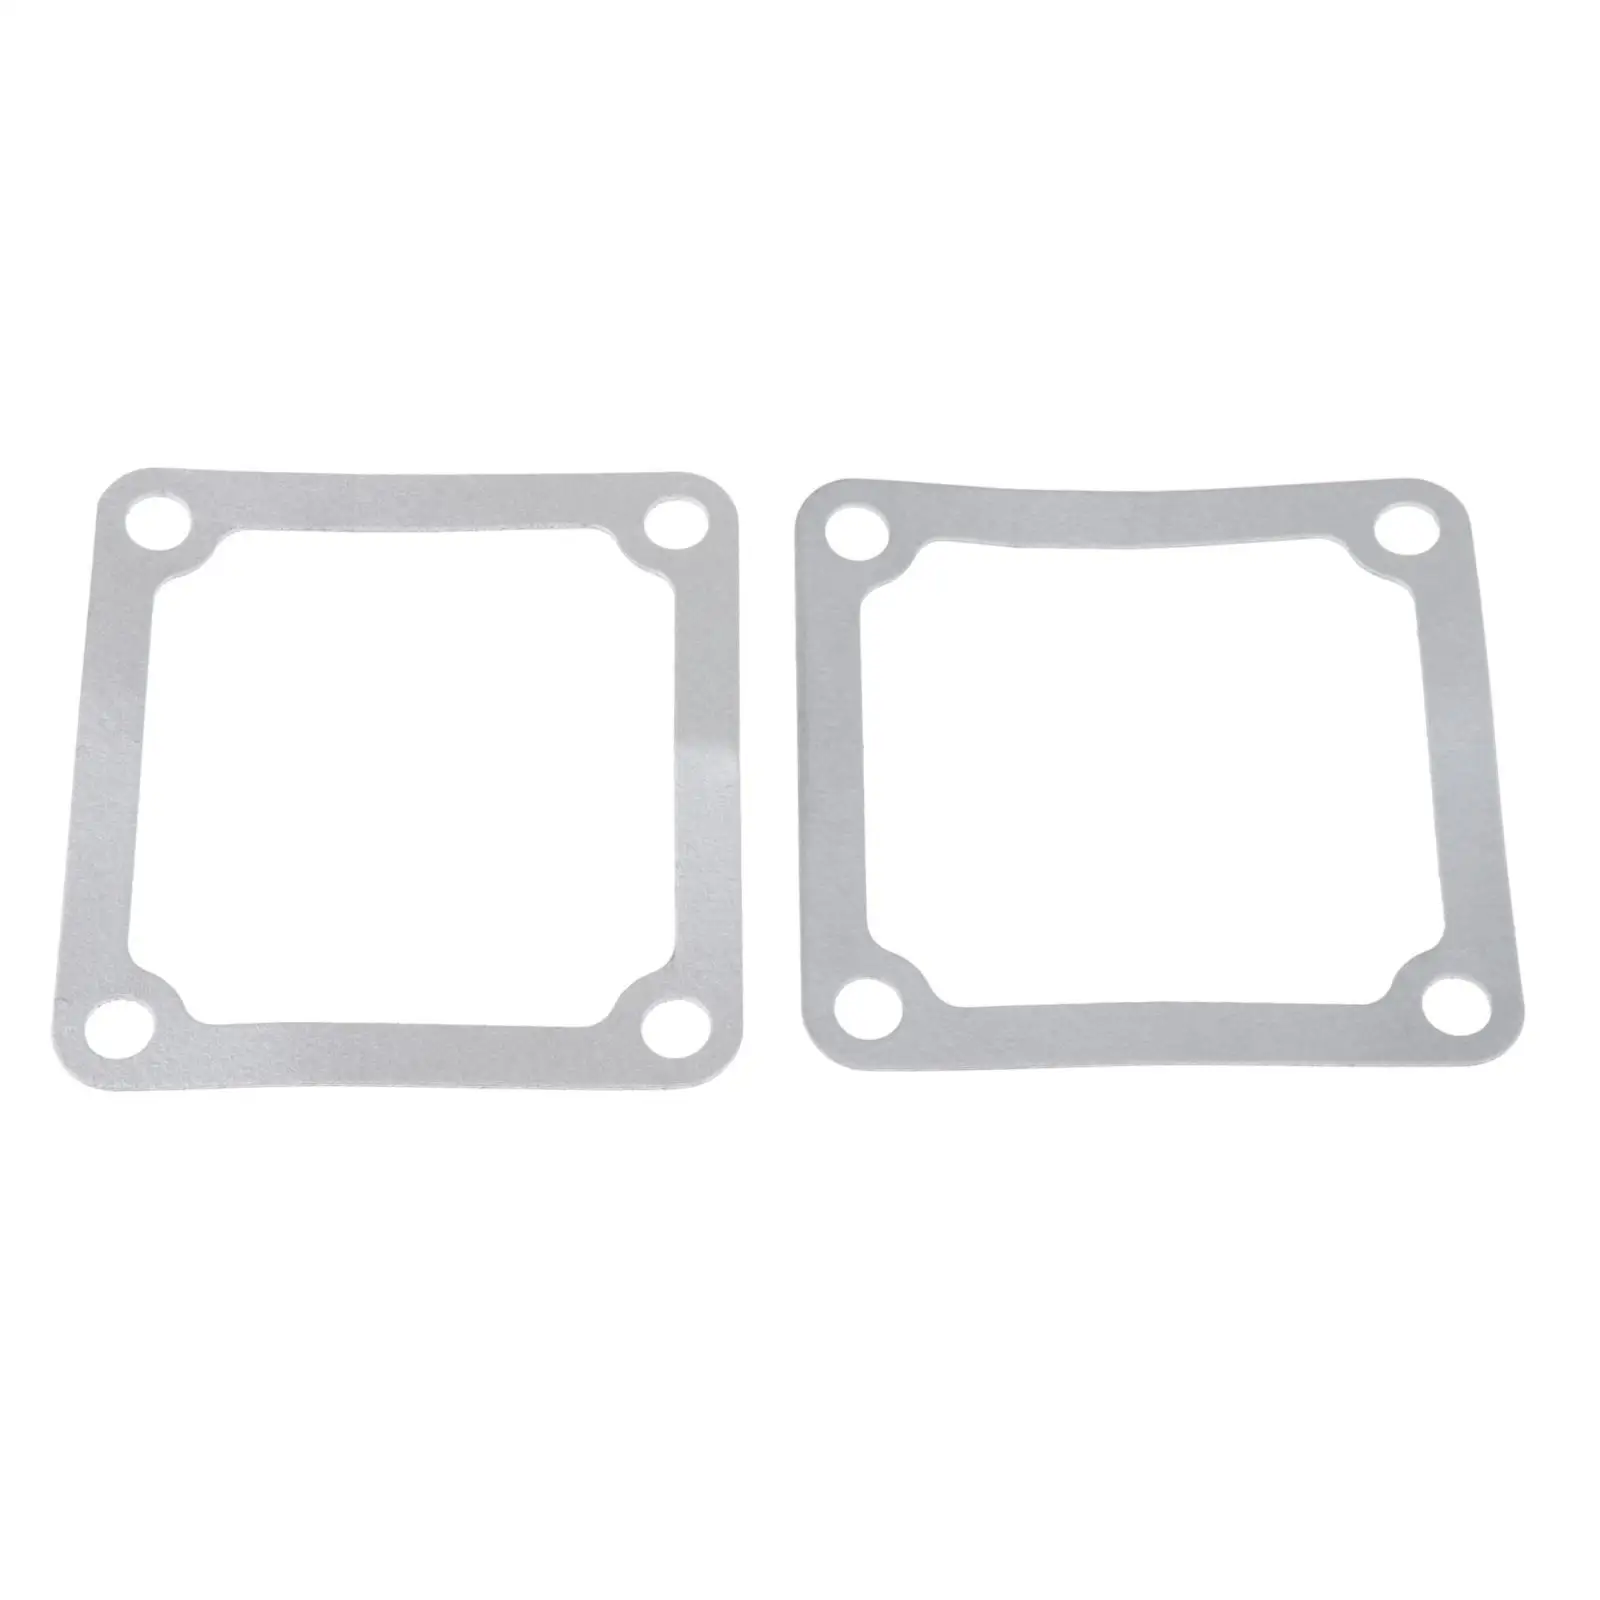 2x Intake Heater Grid Gaskets 12V, 24V 93x98mm Automobile 5.9L Spare Replacement